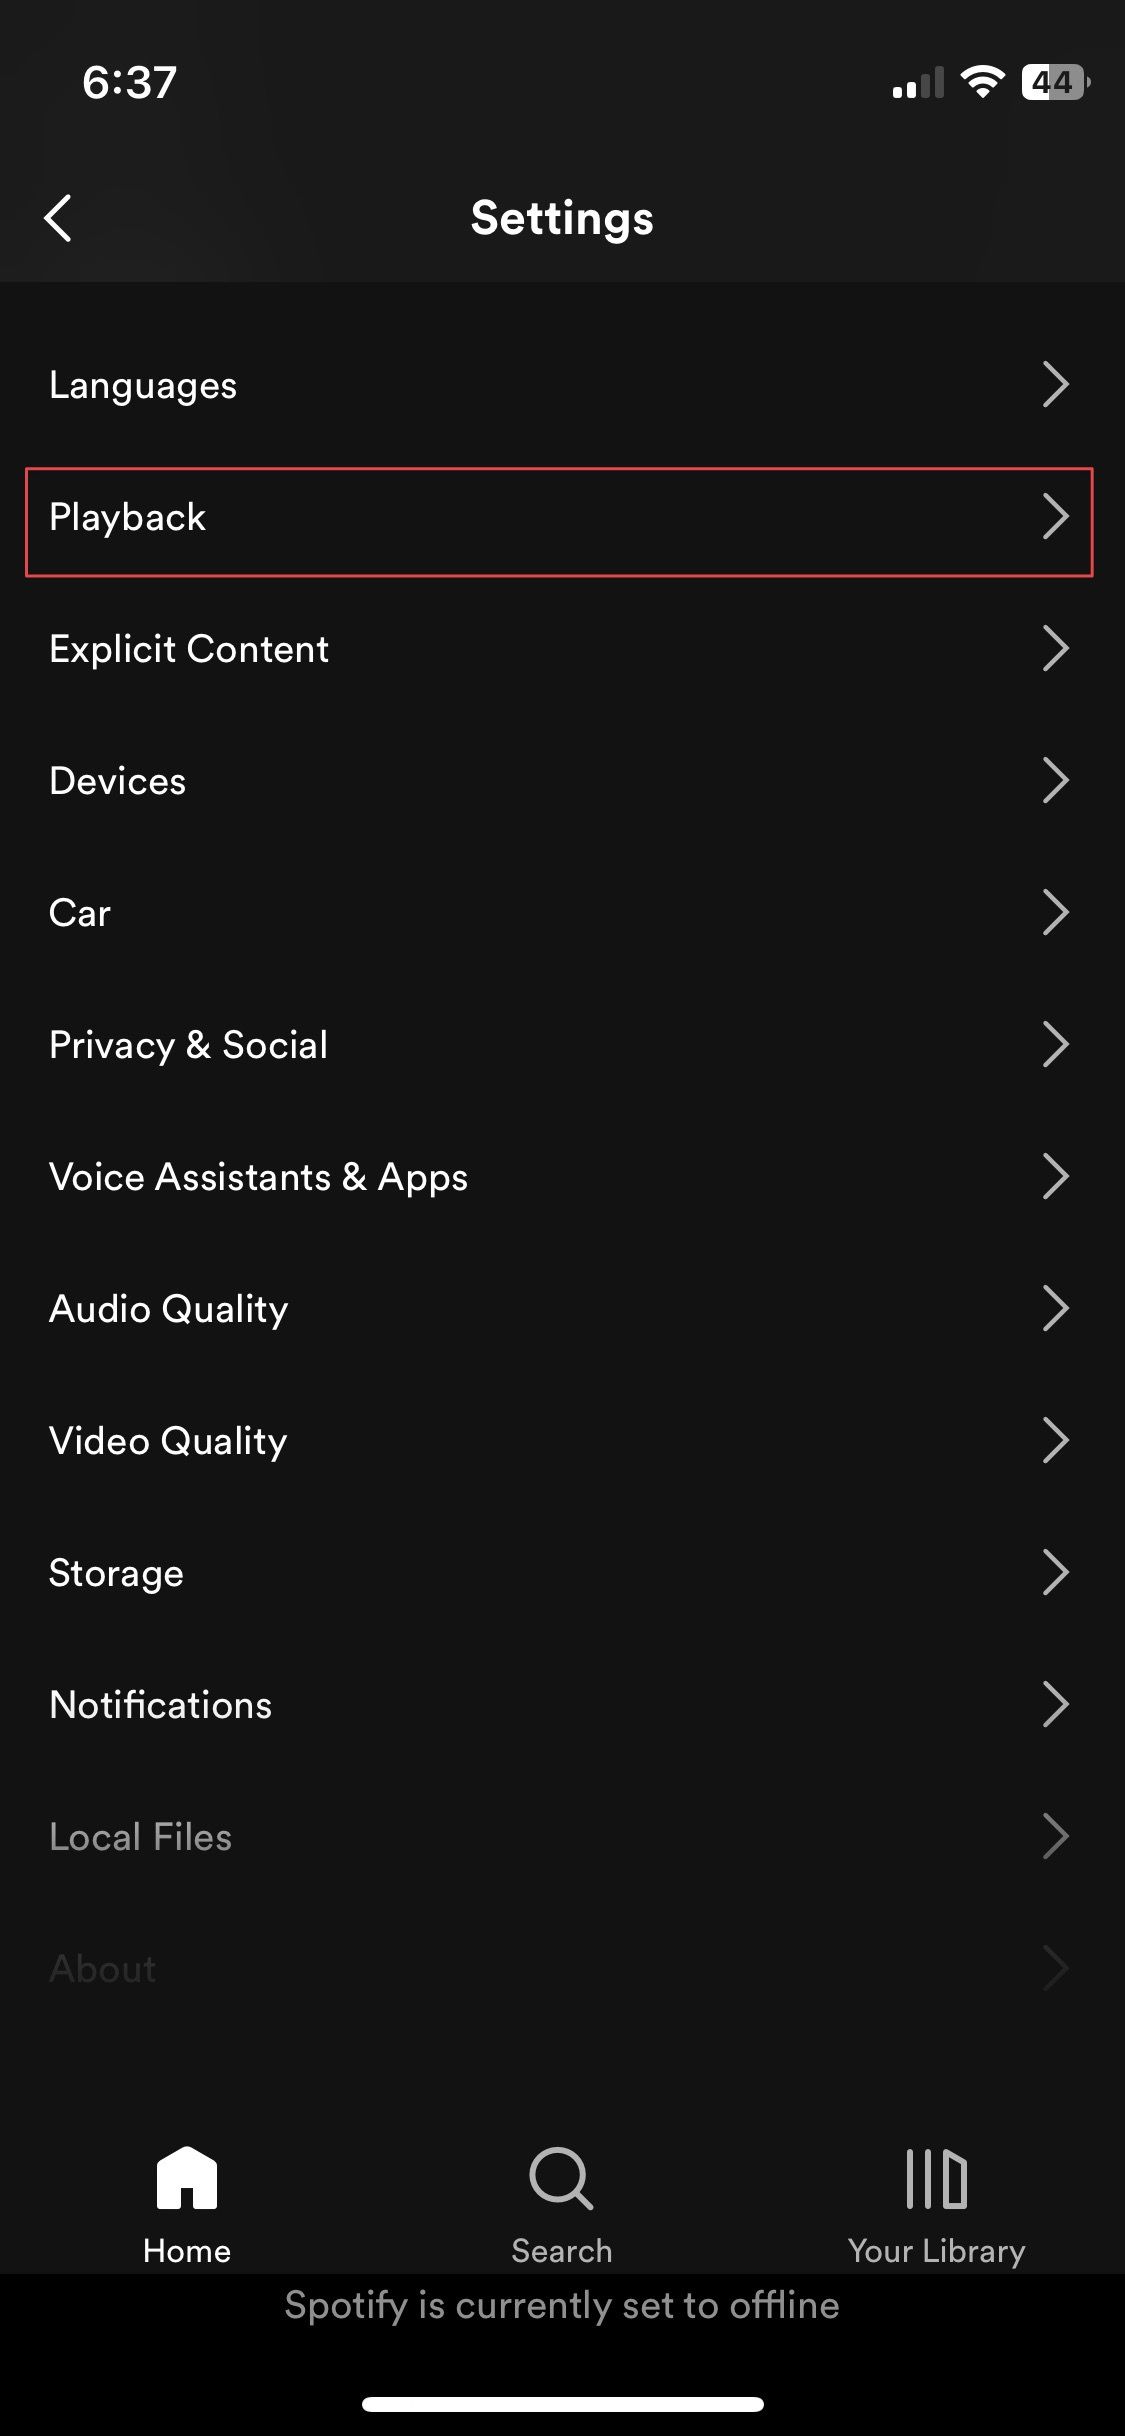 spotify settings page for iPhone app showing playback